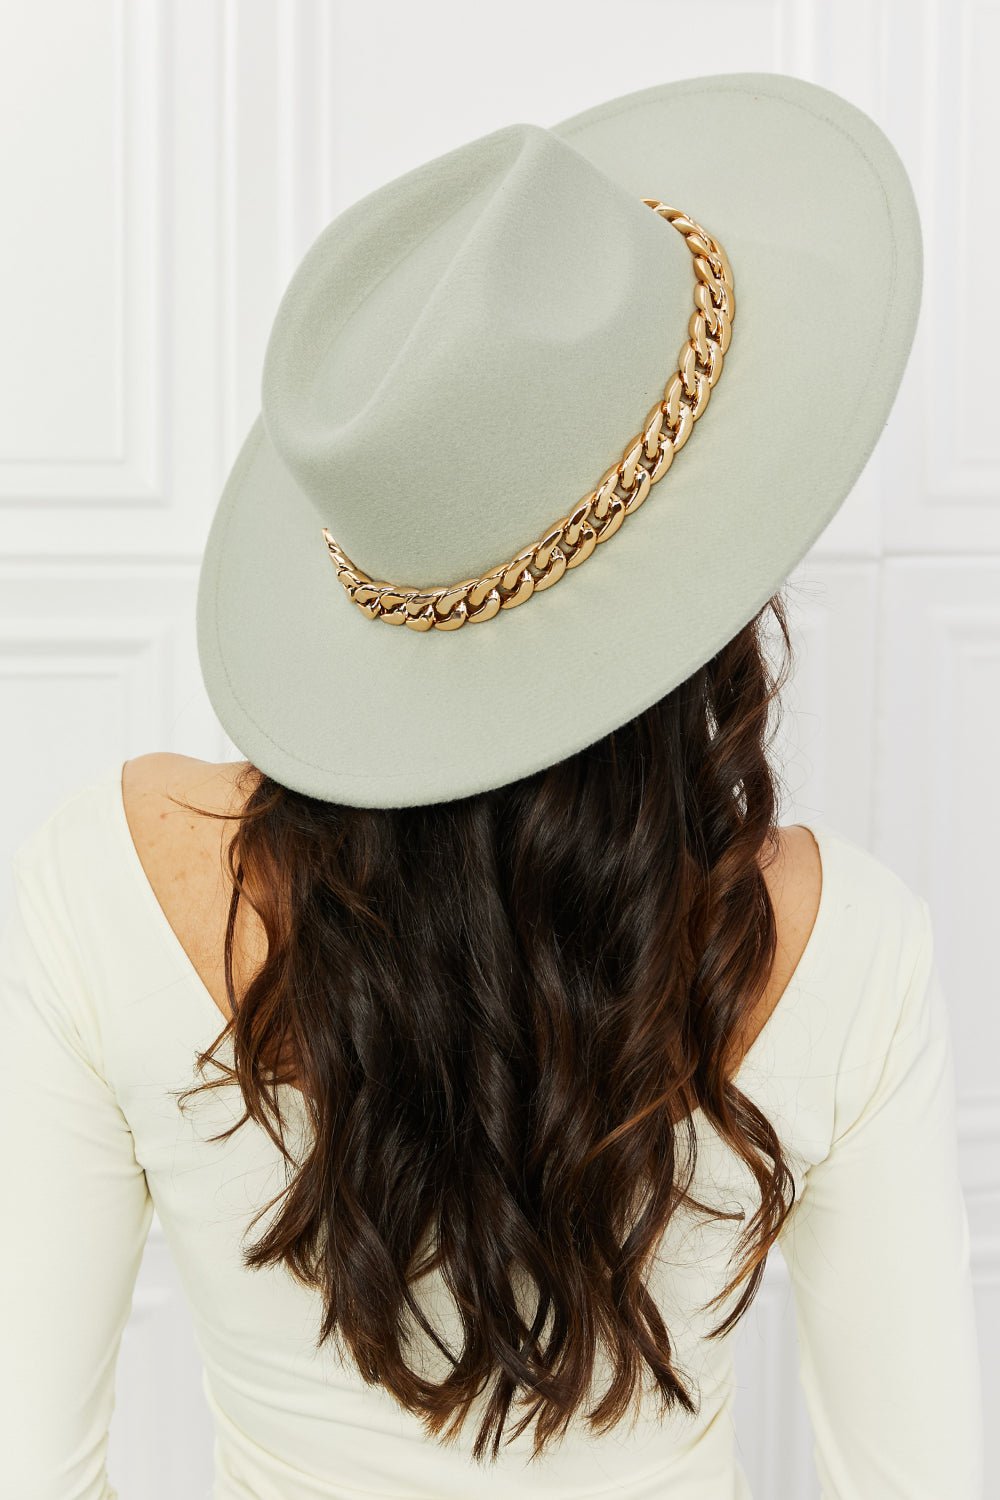 Fame Keep Your Promise Fedora Hat in Mint - pvmark